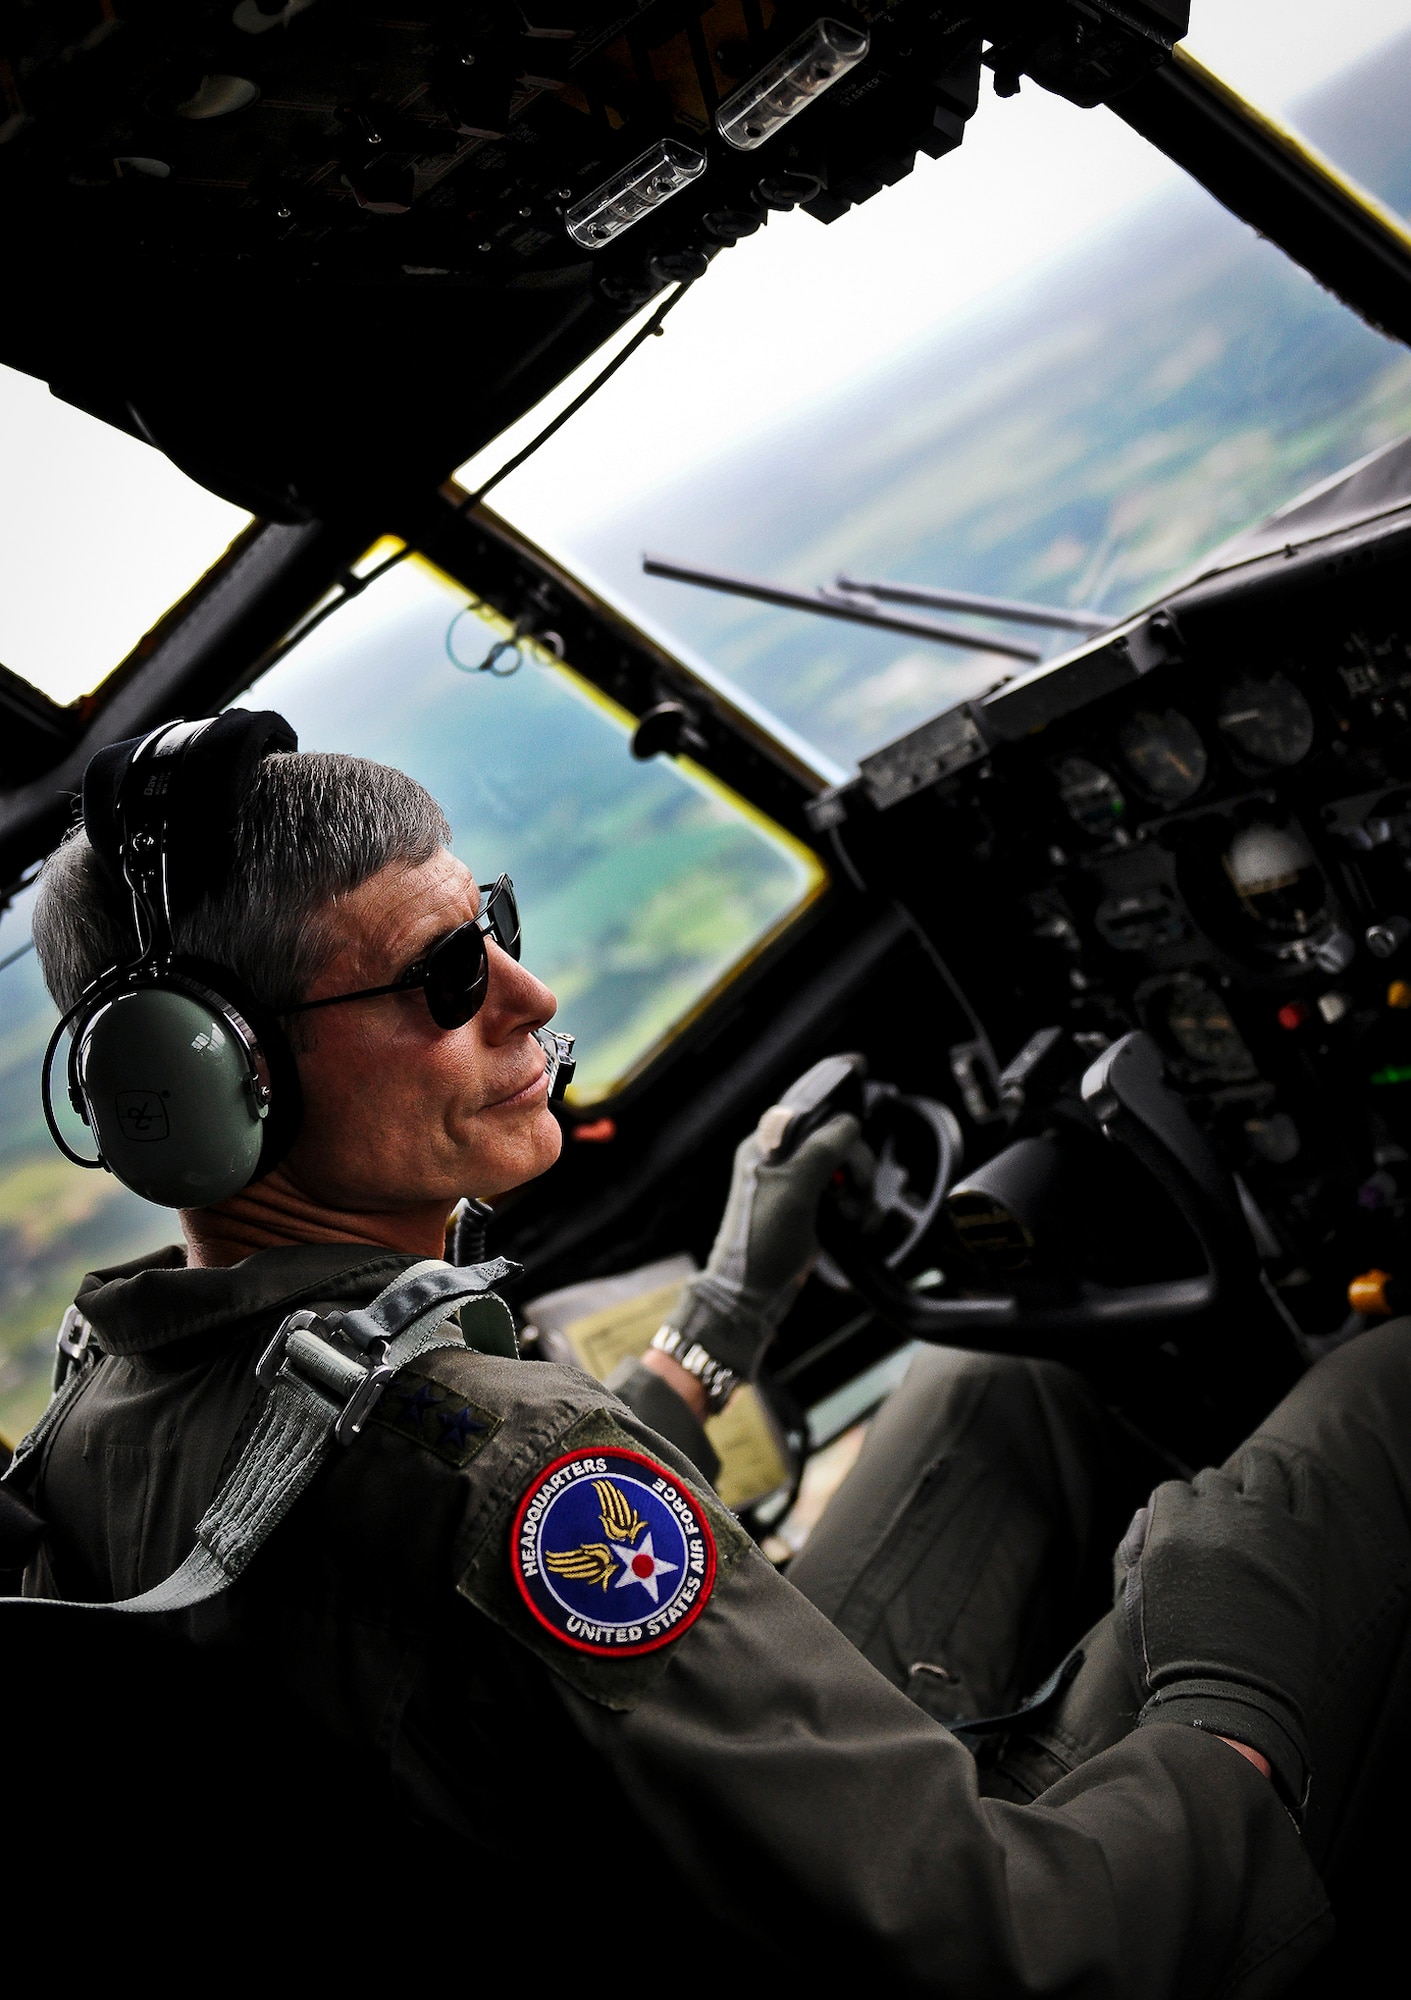 Air Force Chief of Staff Gen. Norton Schwartz flies an MC-130E Combat Talon I during his last flight as an active duty officer near Hurlburt Field, Fla., July 12, 2012. The MC-130E Combat Talon I crew conducted a local training sortie during the mission. It also served as Schwartz’s “fini flight” in the Air Force. (U.S. Air Force photo/Tech. Sgt. Samuel King Jr.)
